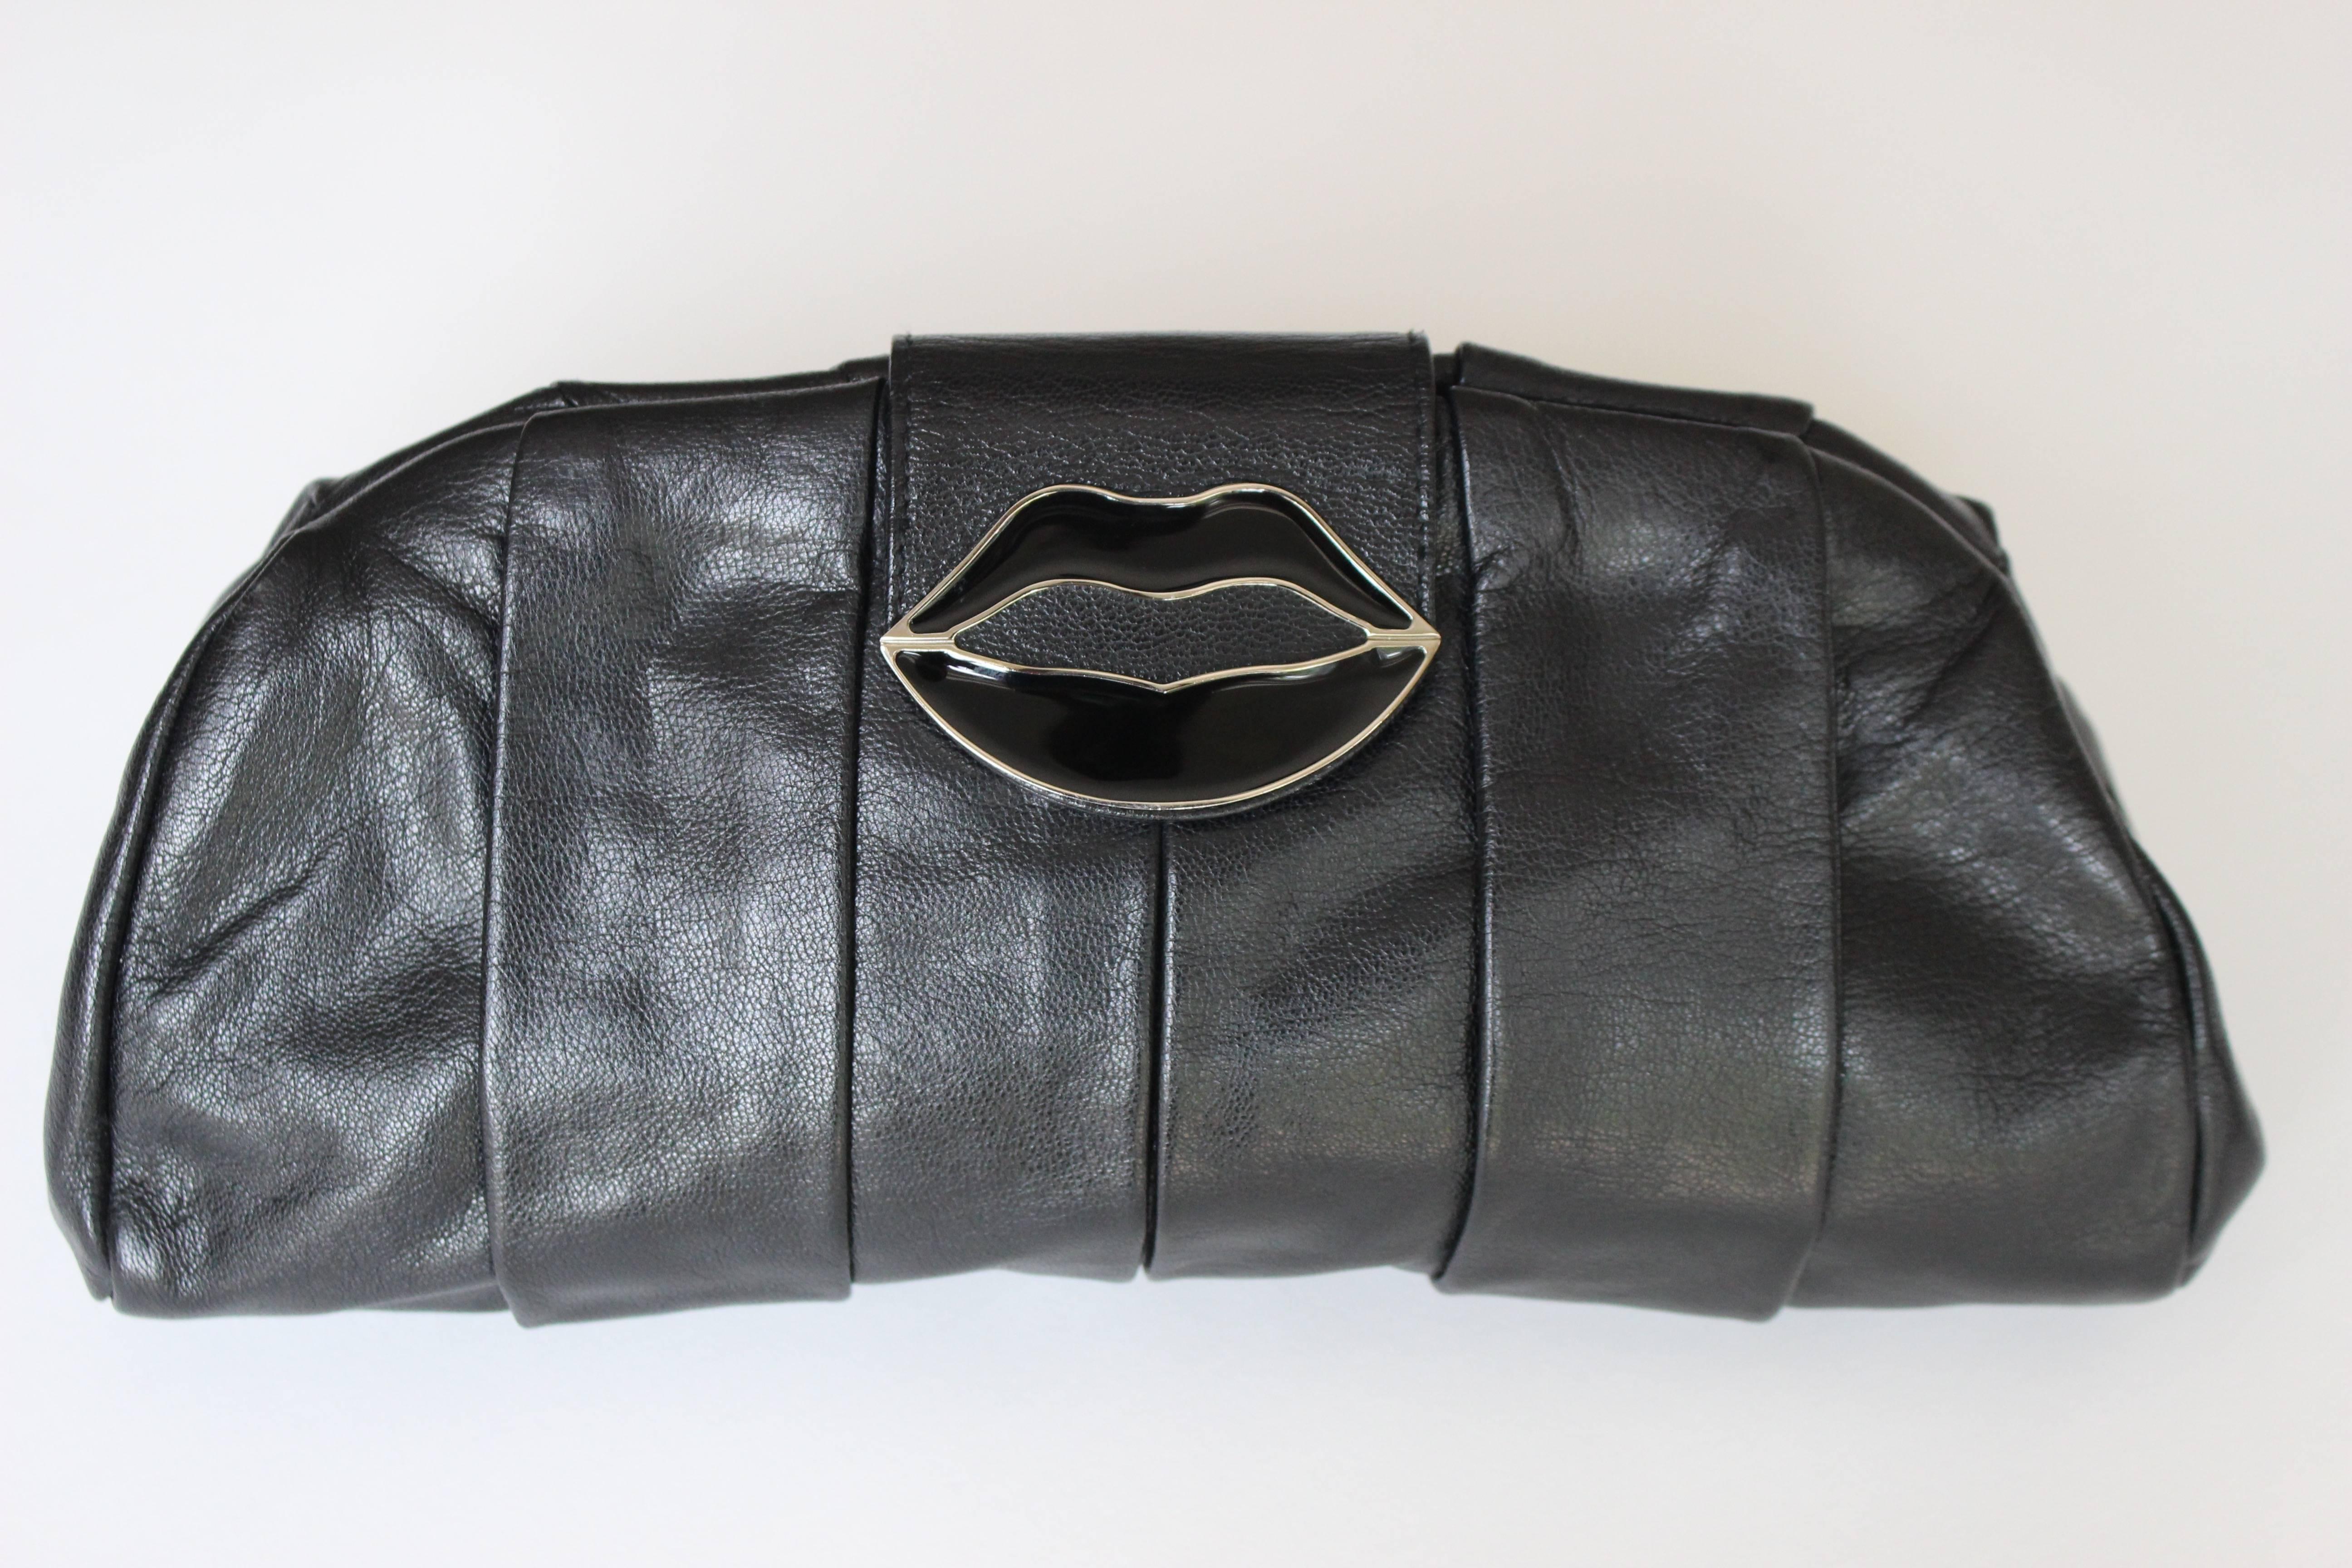 From The Spring 2003 Yves Saint Laurent Collection By Tom Ford Comes This Highly Collectable Black Leather Pleated  Clutch Bag With black and silver kissing  Enamel Lips Magnetic Clasp Closure.
The silver ring detail at the back is to hold the bag.